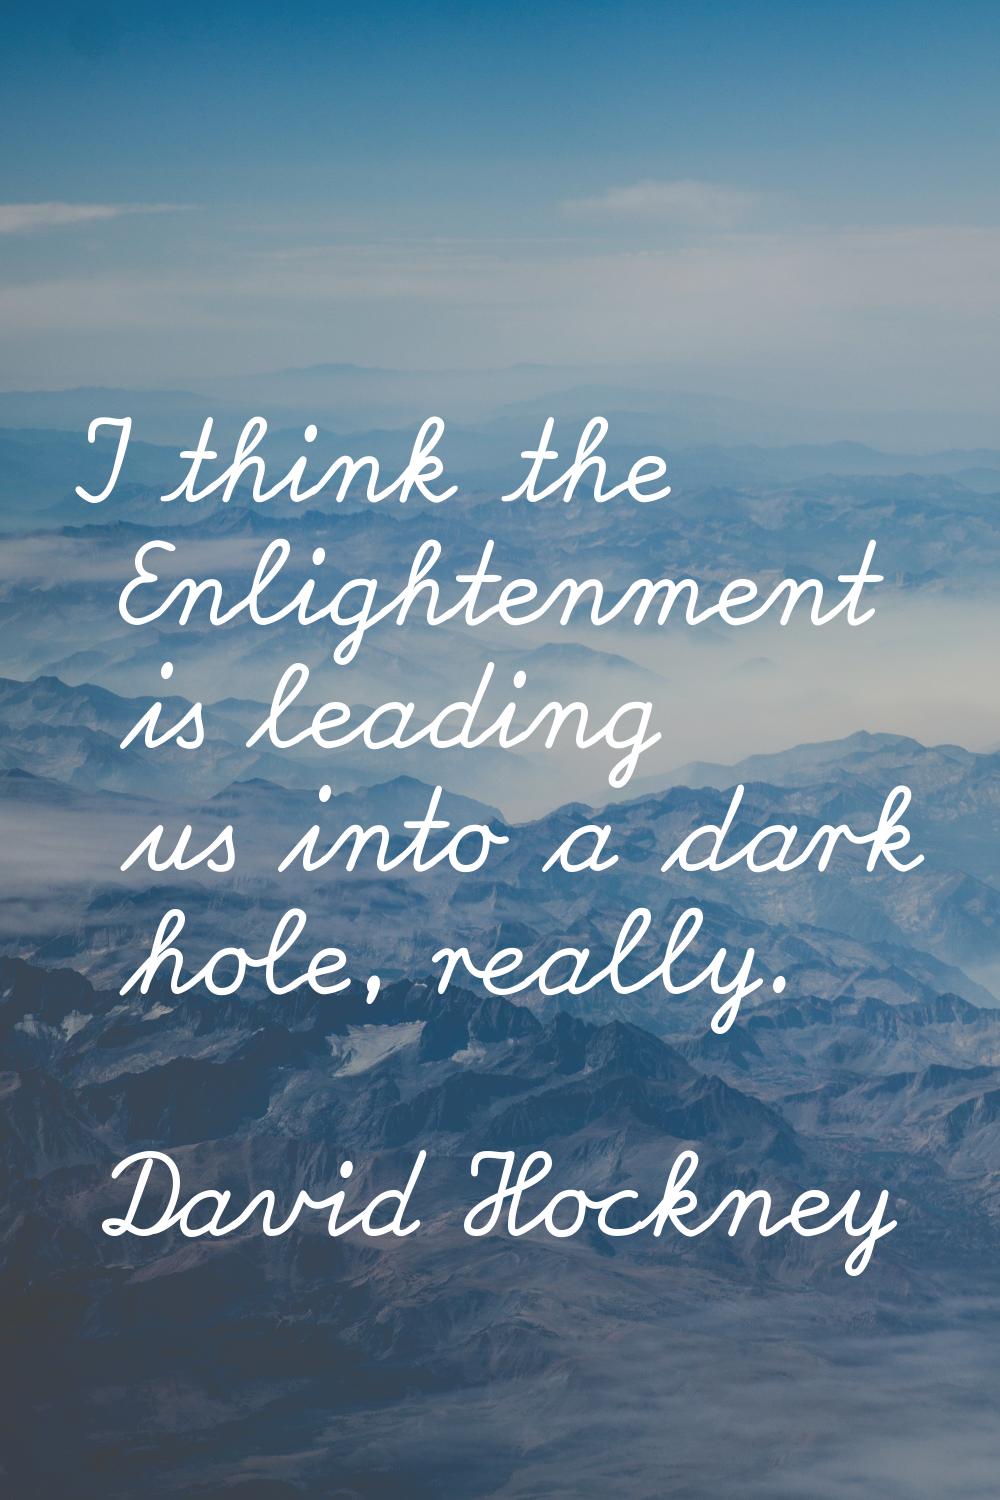 I think the Enlightenment is leading us into a dark hole, really.